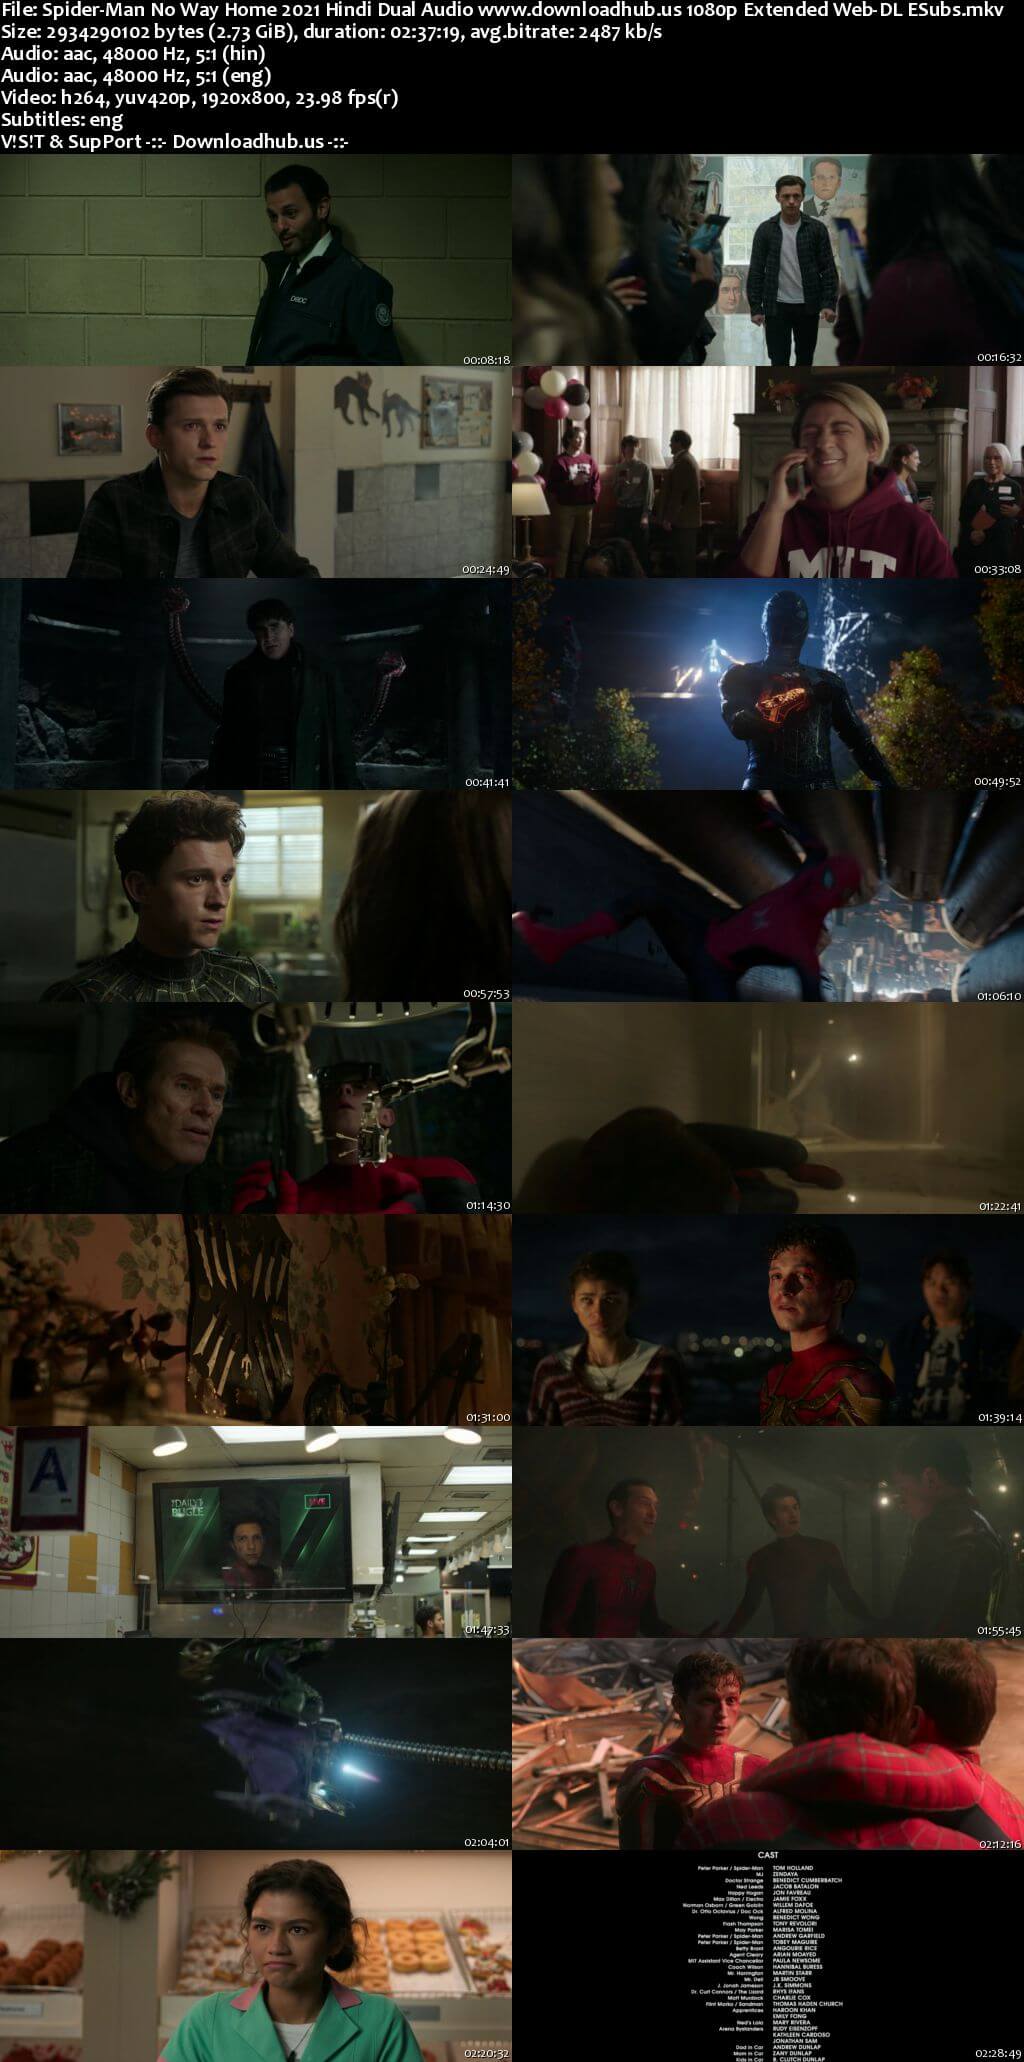 Spider-Man No Way Home 2021 Hindi Dual Audio 1080p 720p 480p Extended Web-DL ESubs HEVC